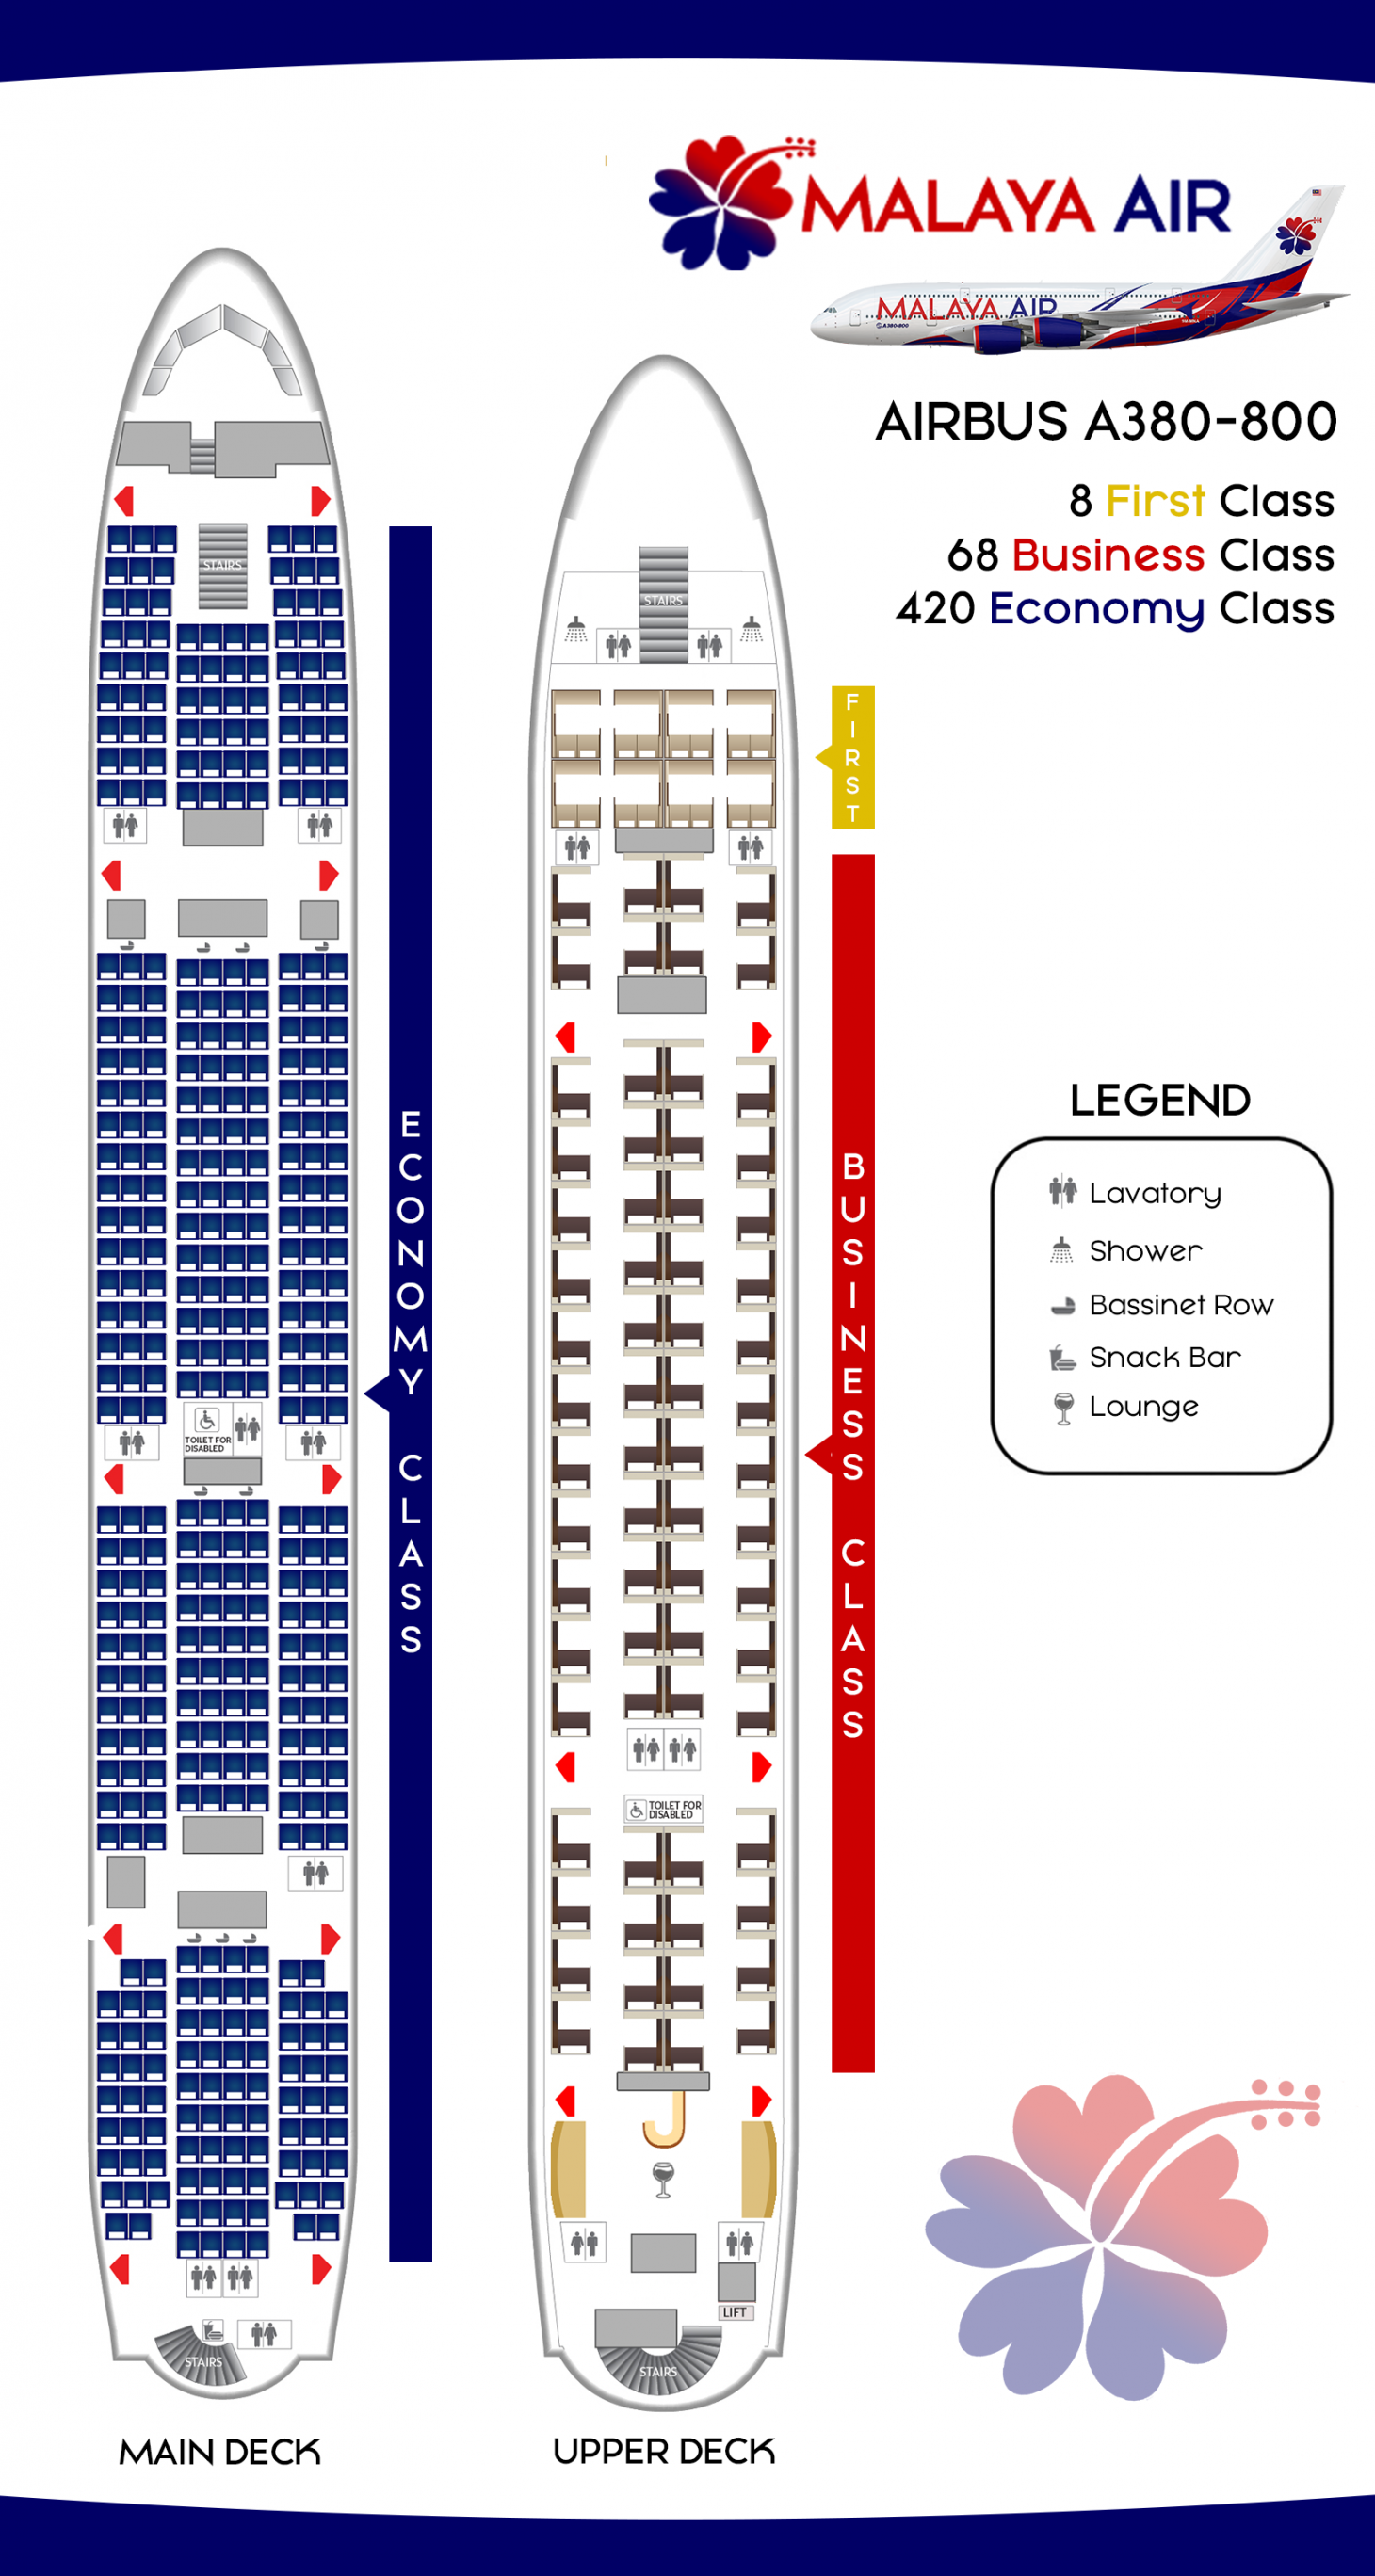 Airbus A380 800 Seating Chart 2e3